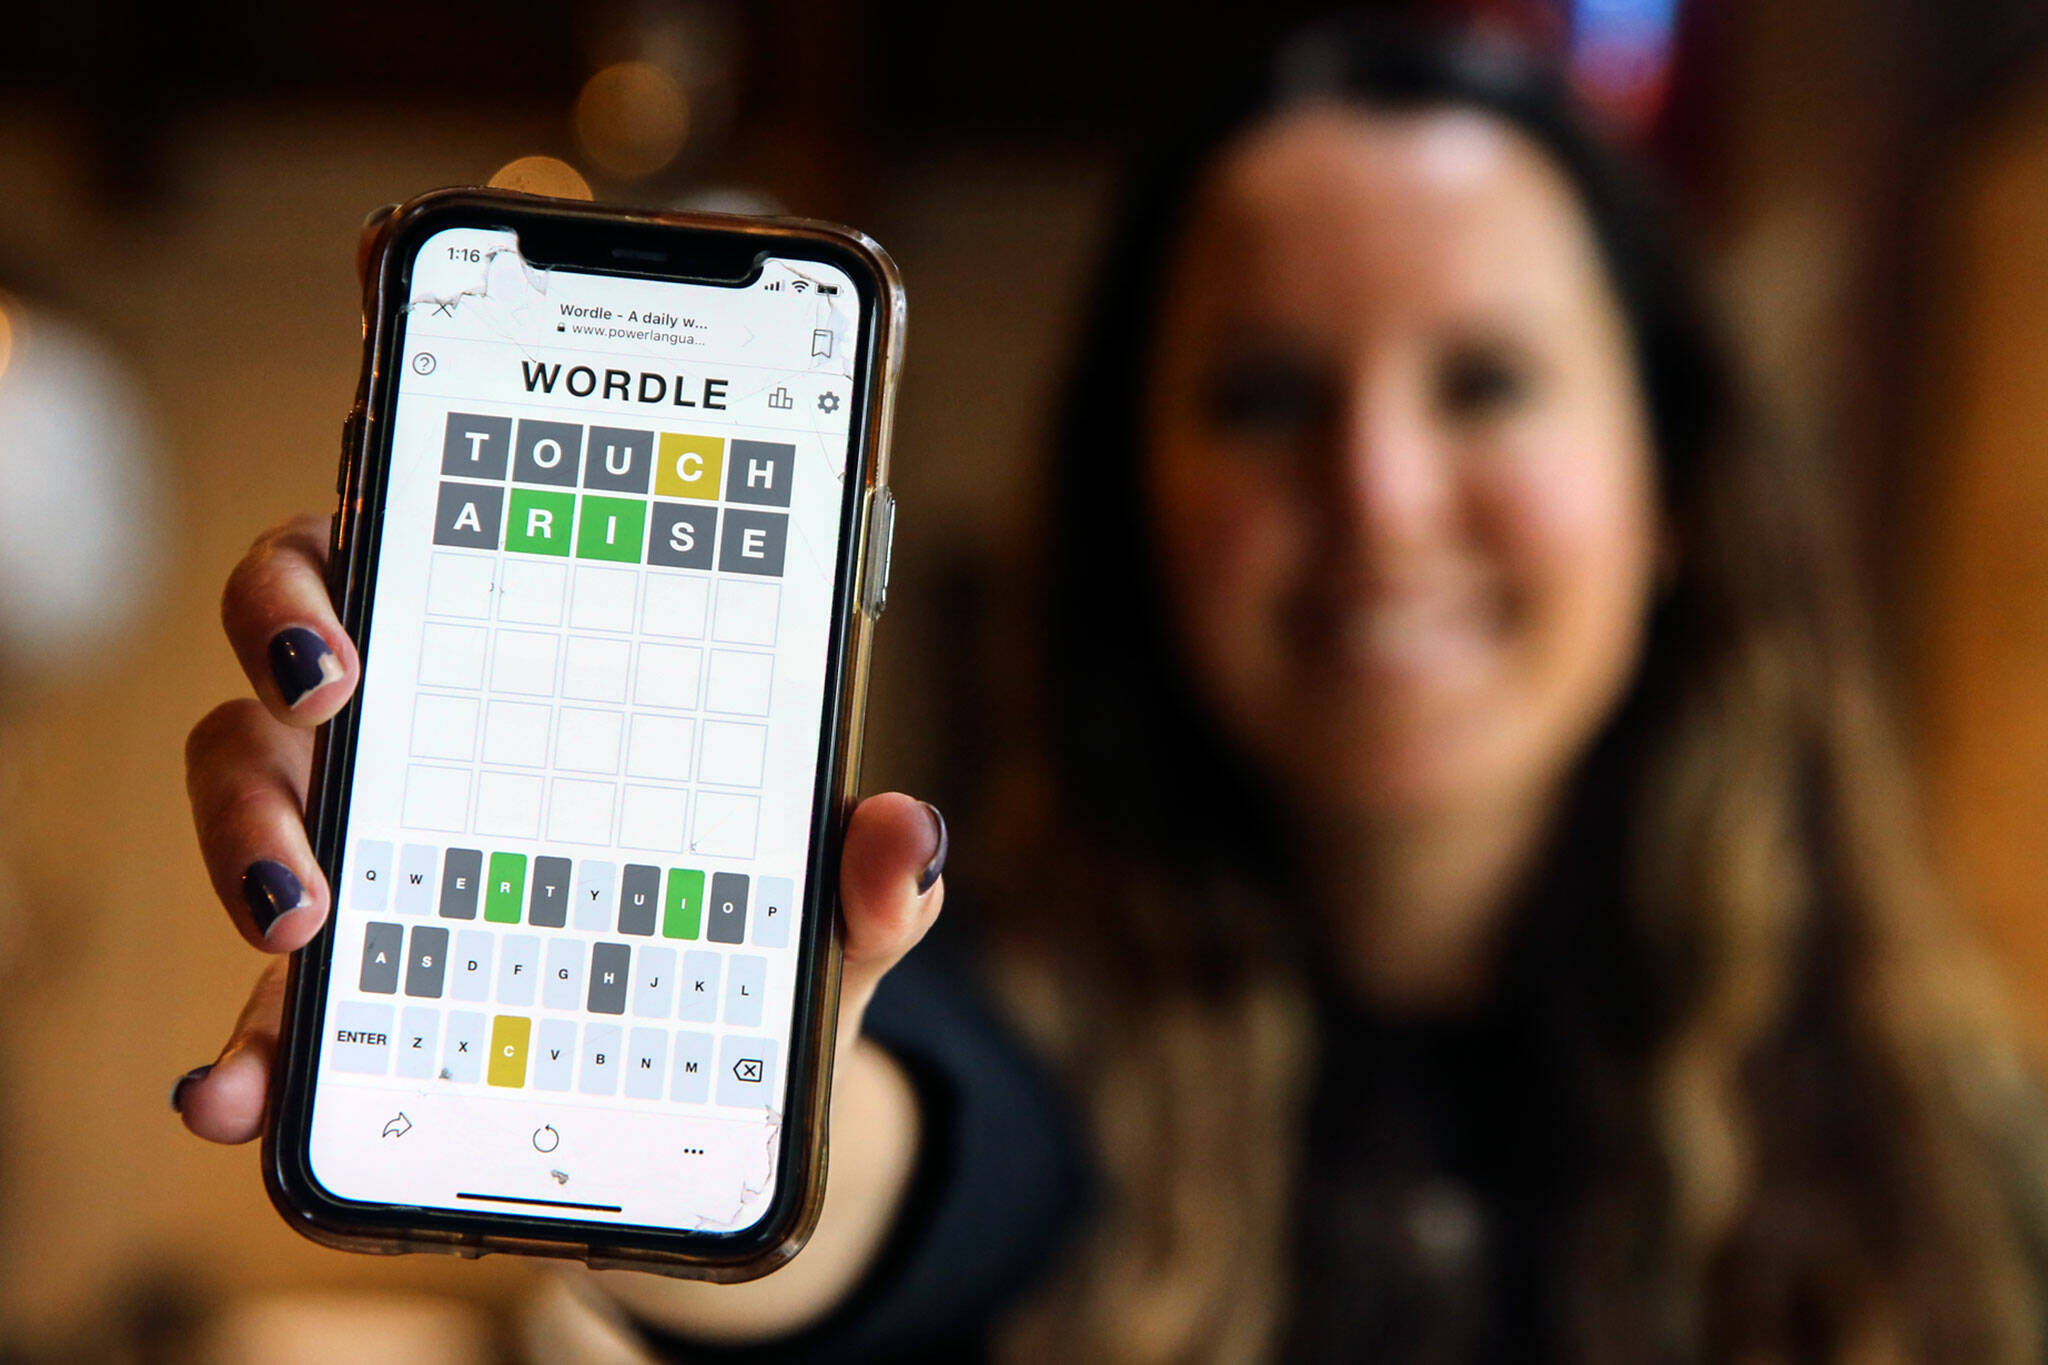 Christa Meyer, 41, a home health physical therapist, plays Wordle daily at her Mountlake Terrace home or on her lunch break between patients in her car. (Kevin Clark / The Herald)